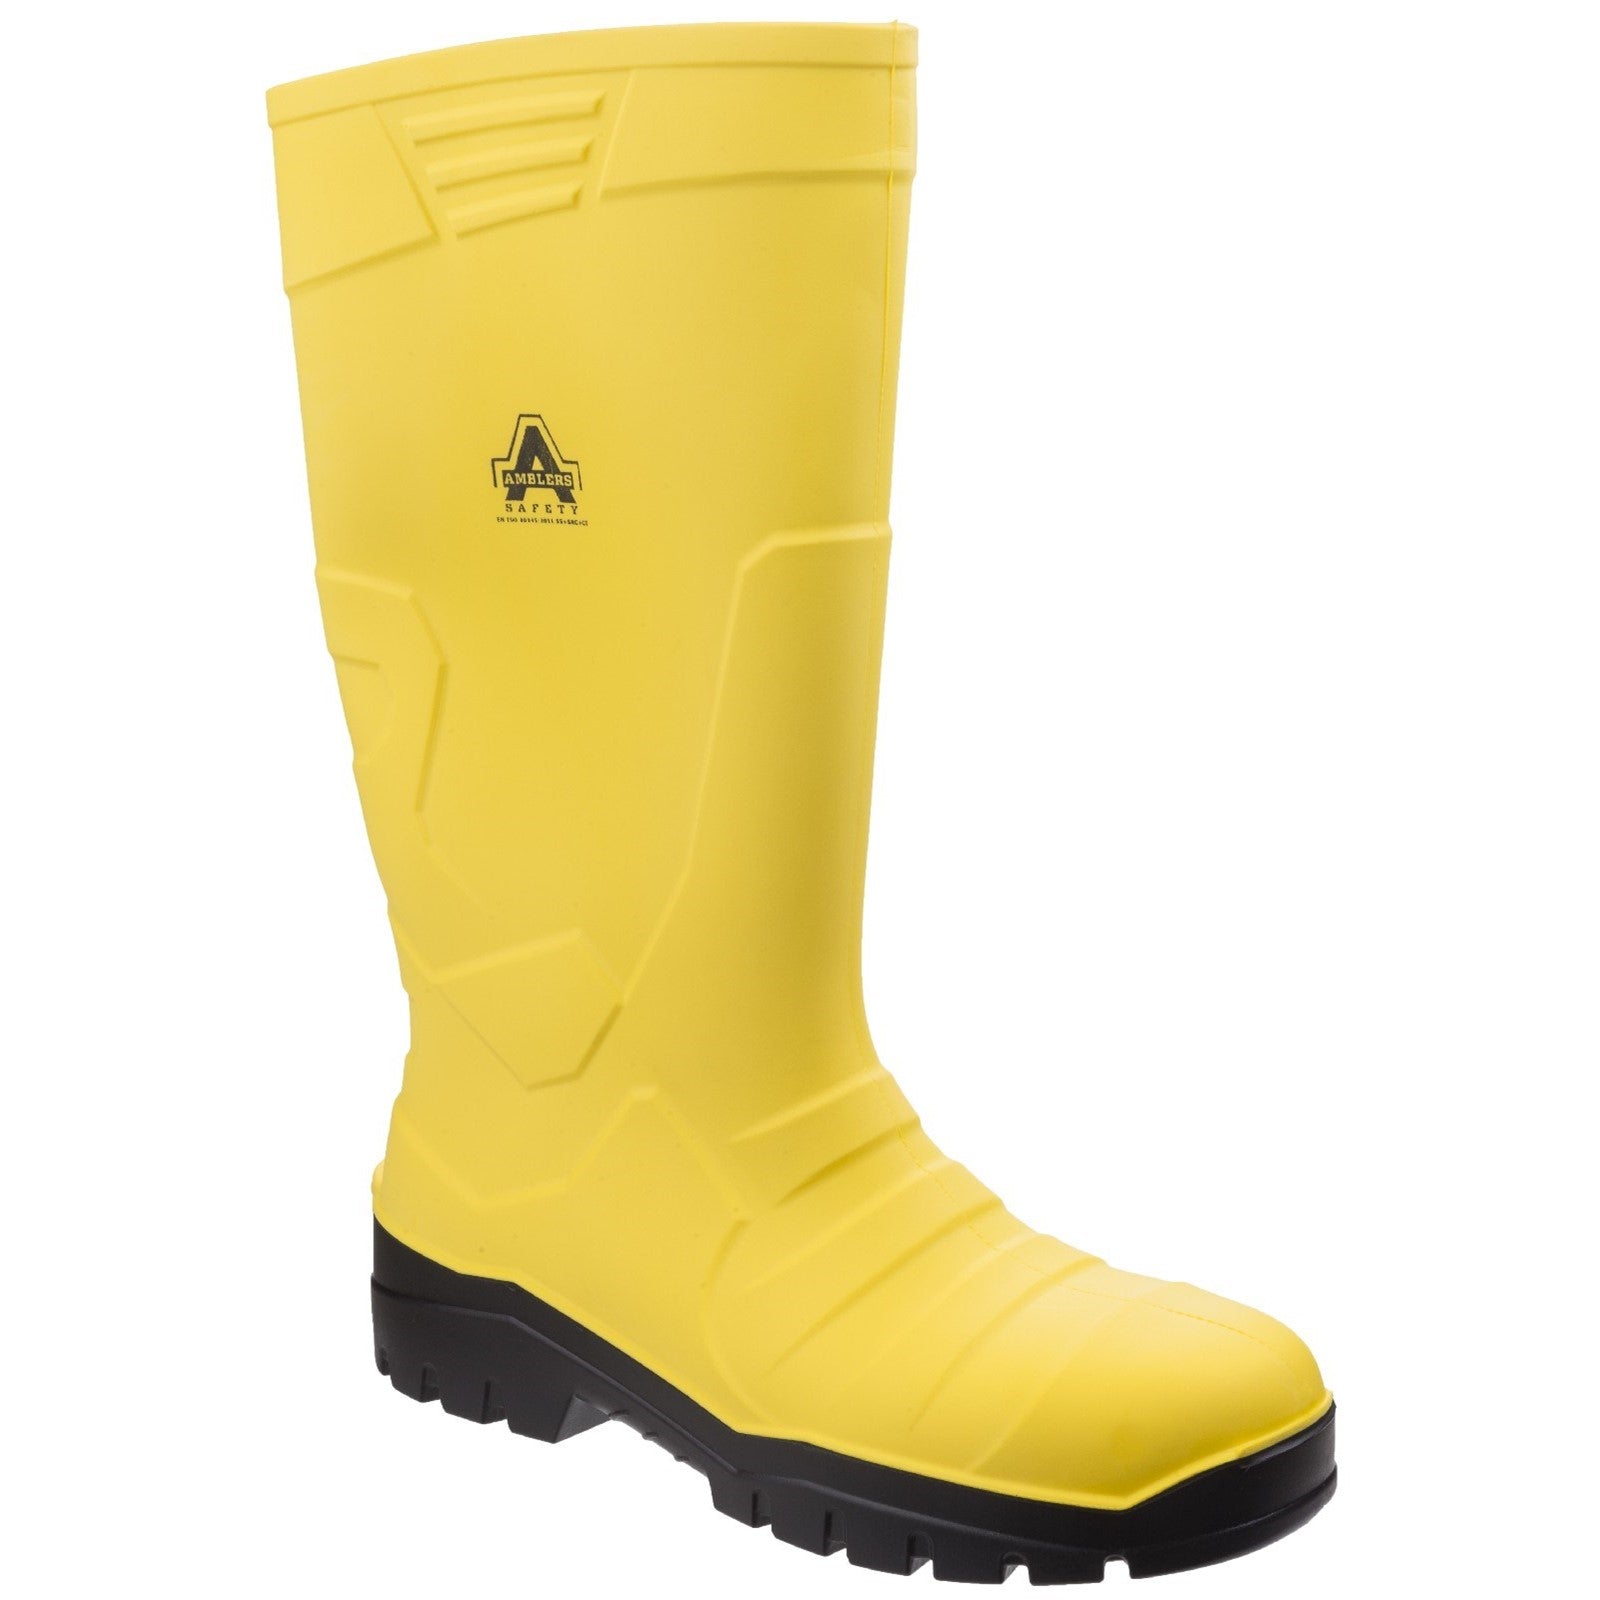 Amblers Safety AS1007 Full Safety Wellington Boots